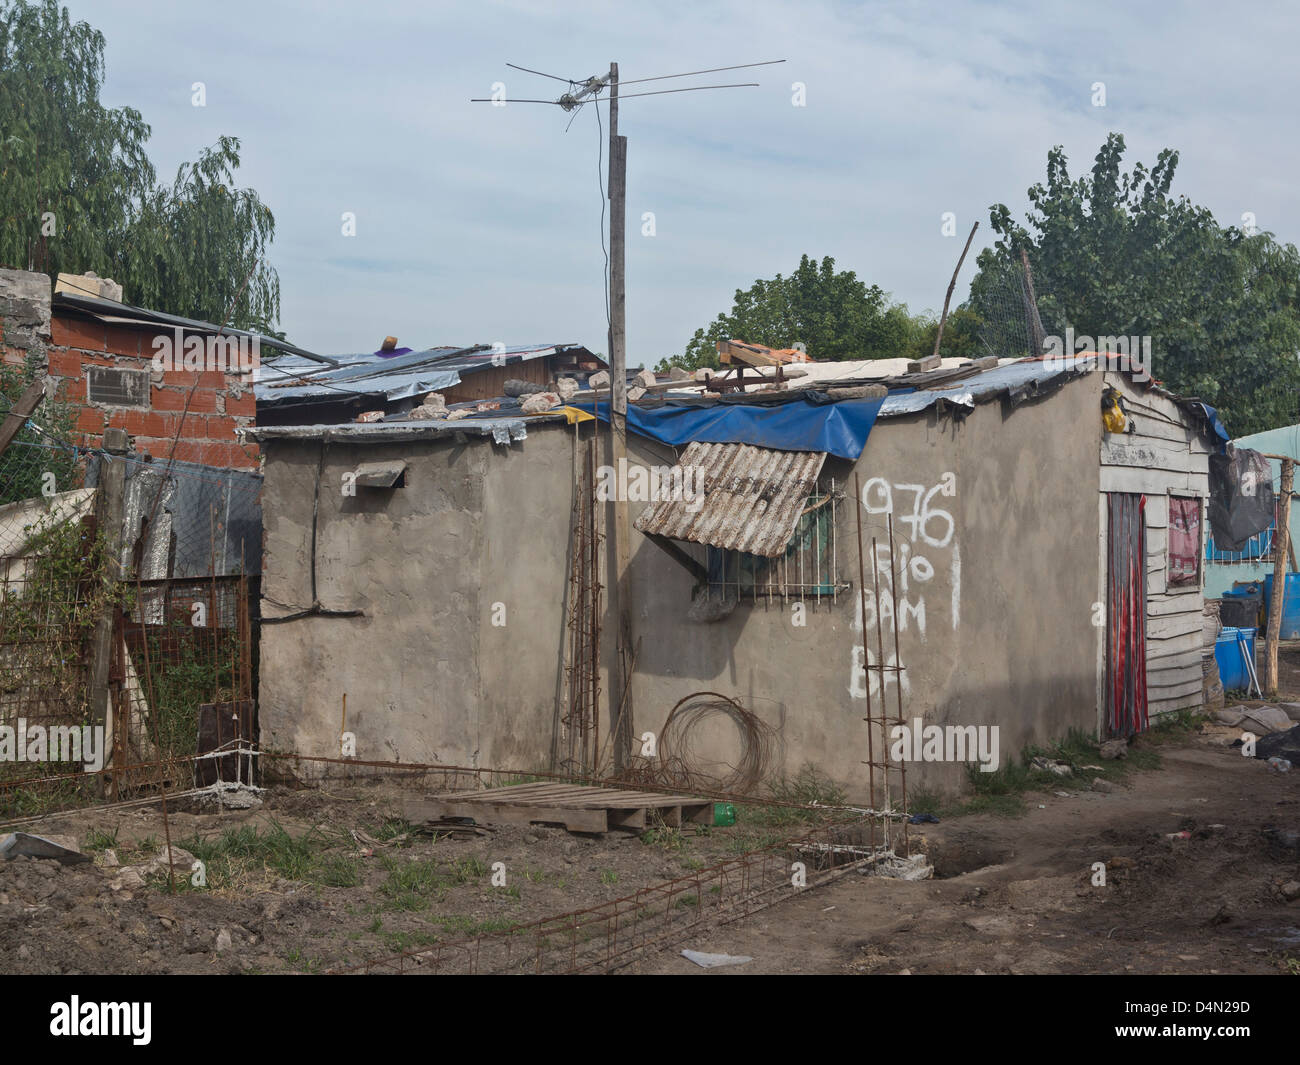 A 'villa miseria' shanty town in Buenos Aires, Argentina Stock Photo